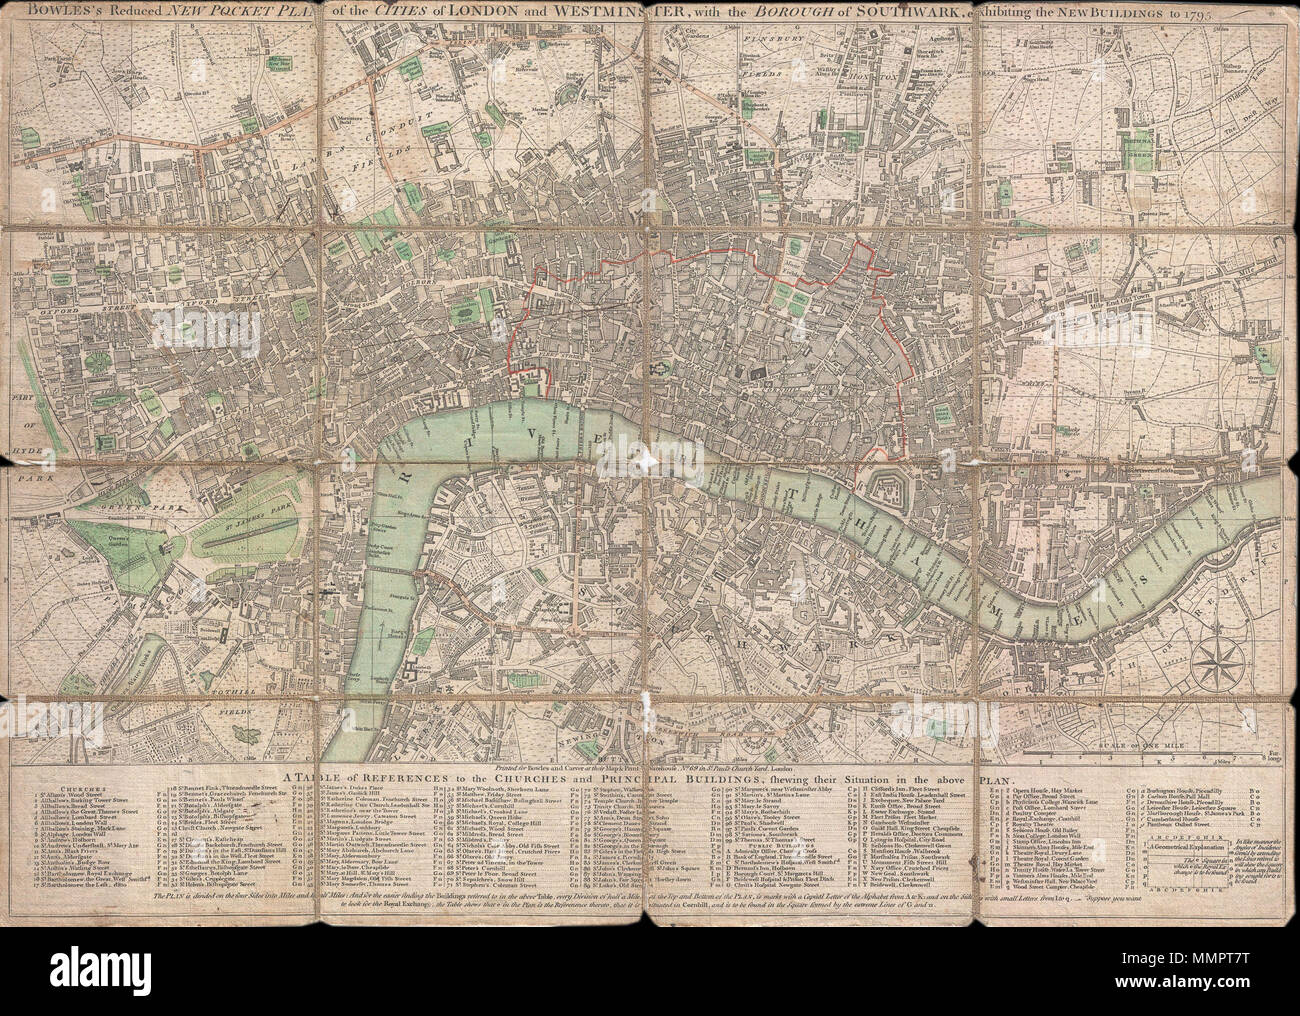 .  English: This is a rare 1795 folding pocket map or street plan of London, England by Carrington Bowles. Covers London on both sides of the Thames River from Hyde Park in the west to White Horse Street in the East and from Lambeth in the south to Islington in the North. Offers superb detail throughout often noting individual buildings, gardens, and estates. Table along the bottom notes principle buildings and churches. Bowles first issued this plan in 1777 and updated it regularly to the end of the 18th century. This edition of the map was issued shortly after Bowles's death by his firm, Bow Stock Photo